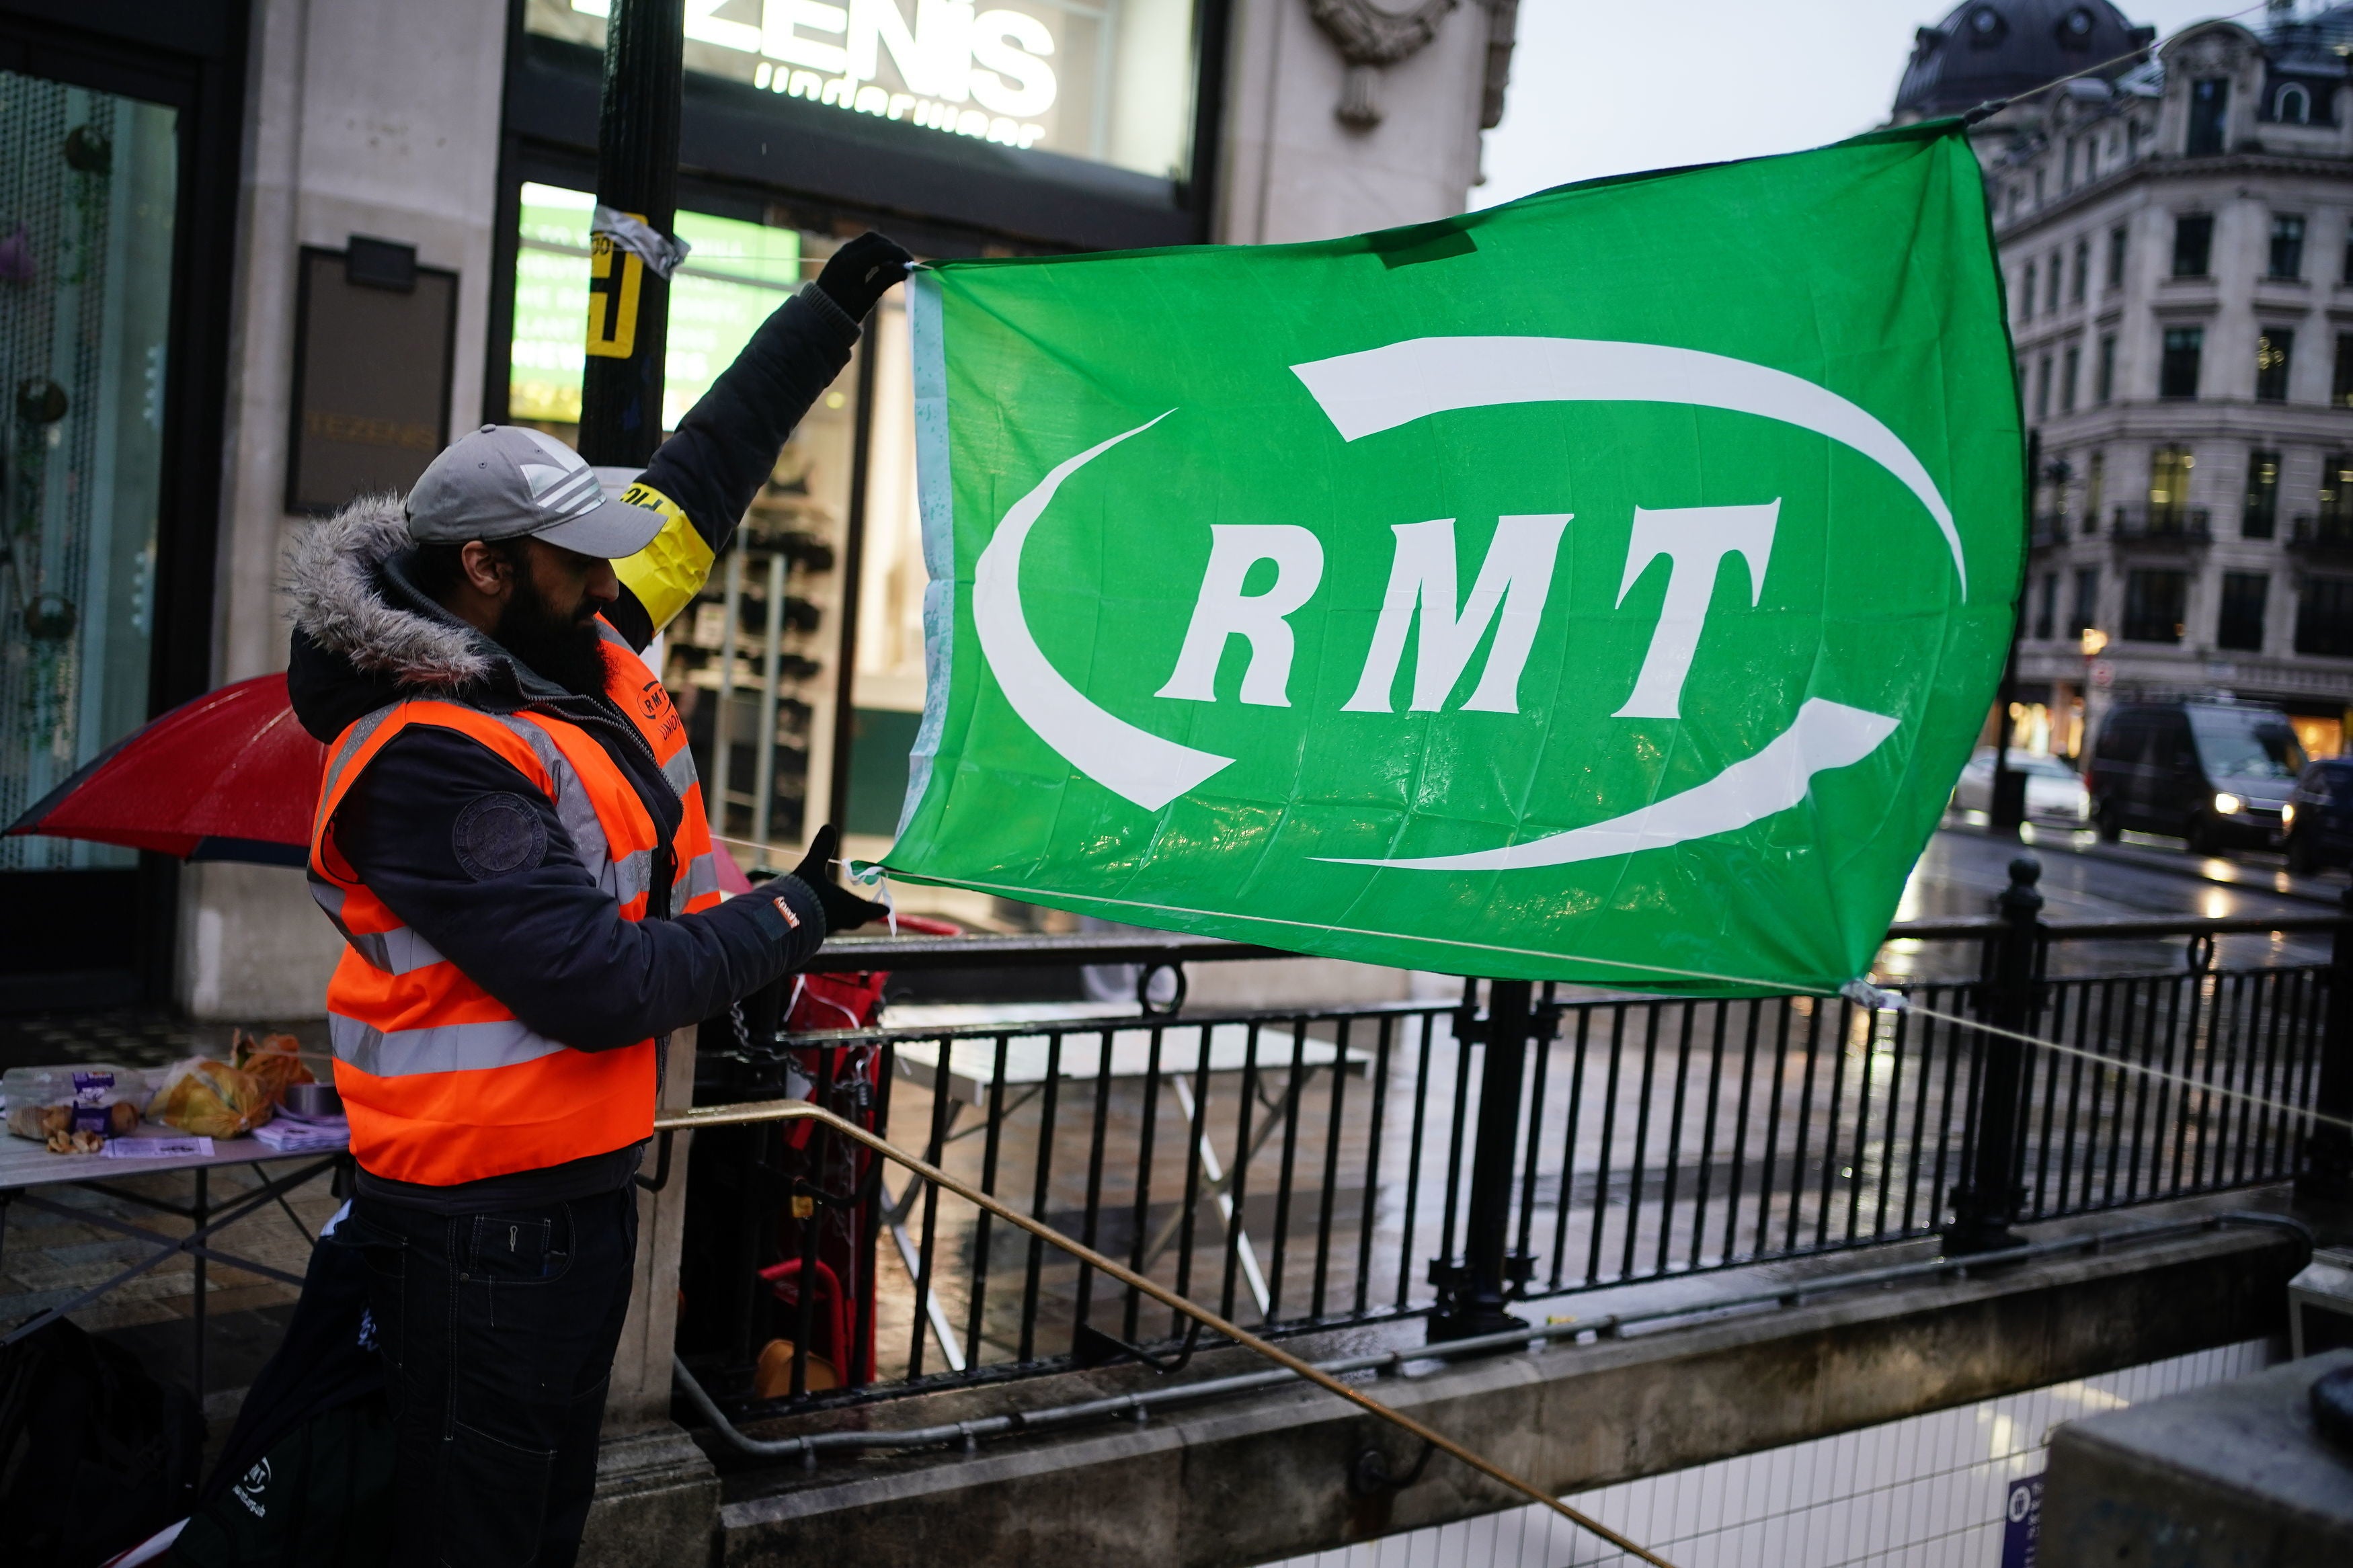 Tube services across the capital will be crippled as members of the Rail, Maritime and Transport union (RMT) plan to walk out for 24 hours